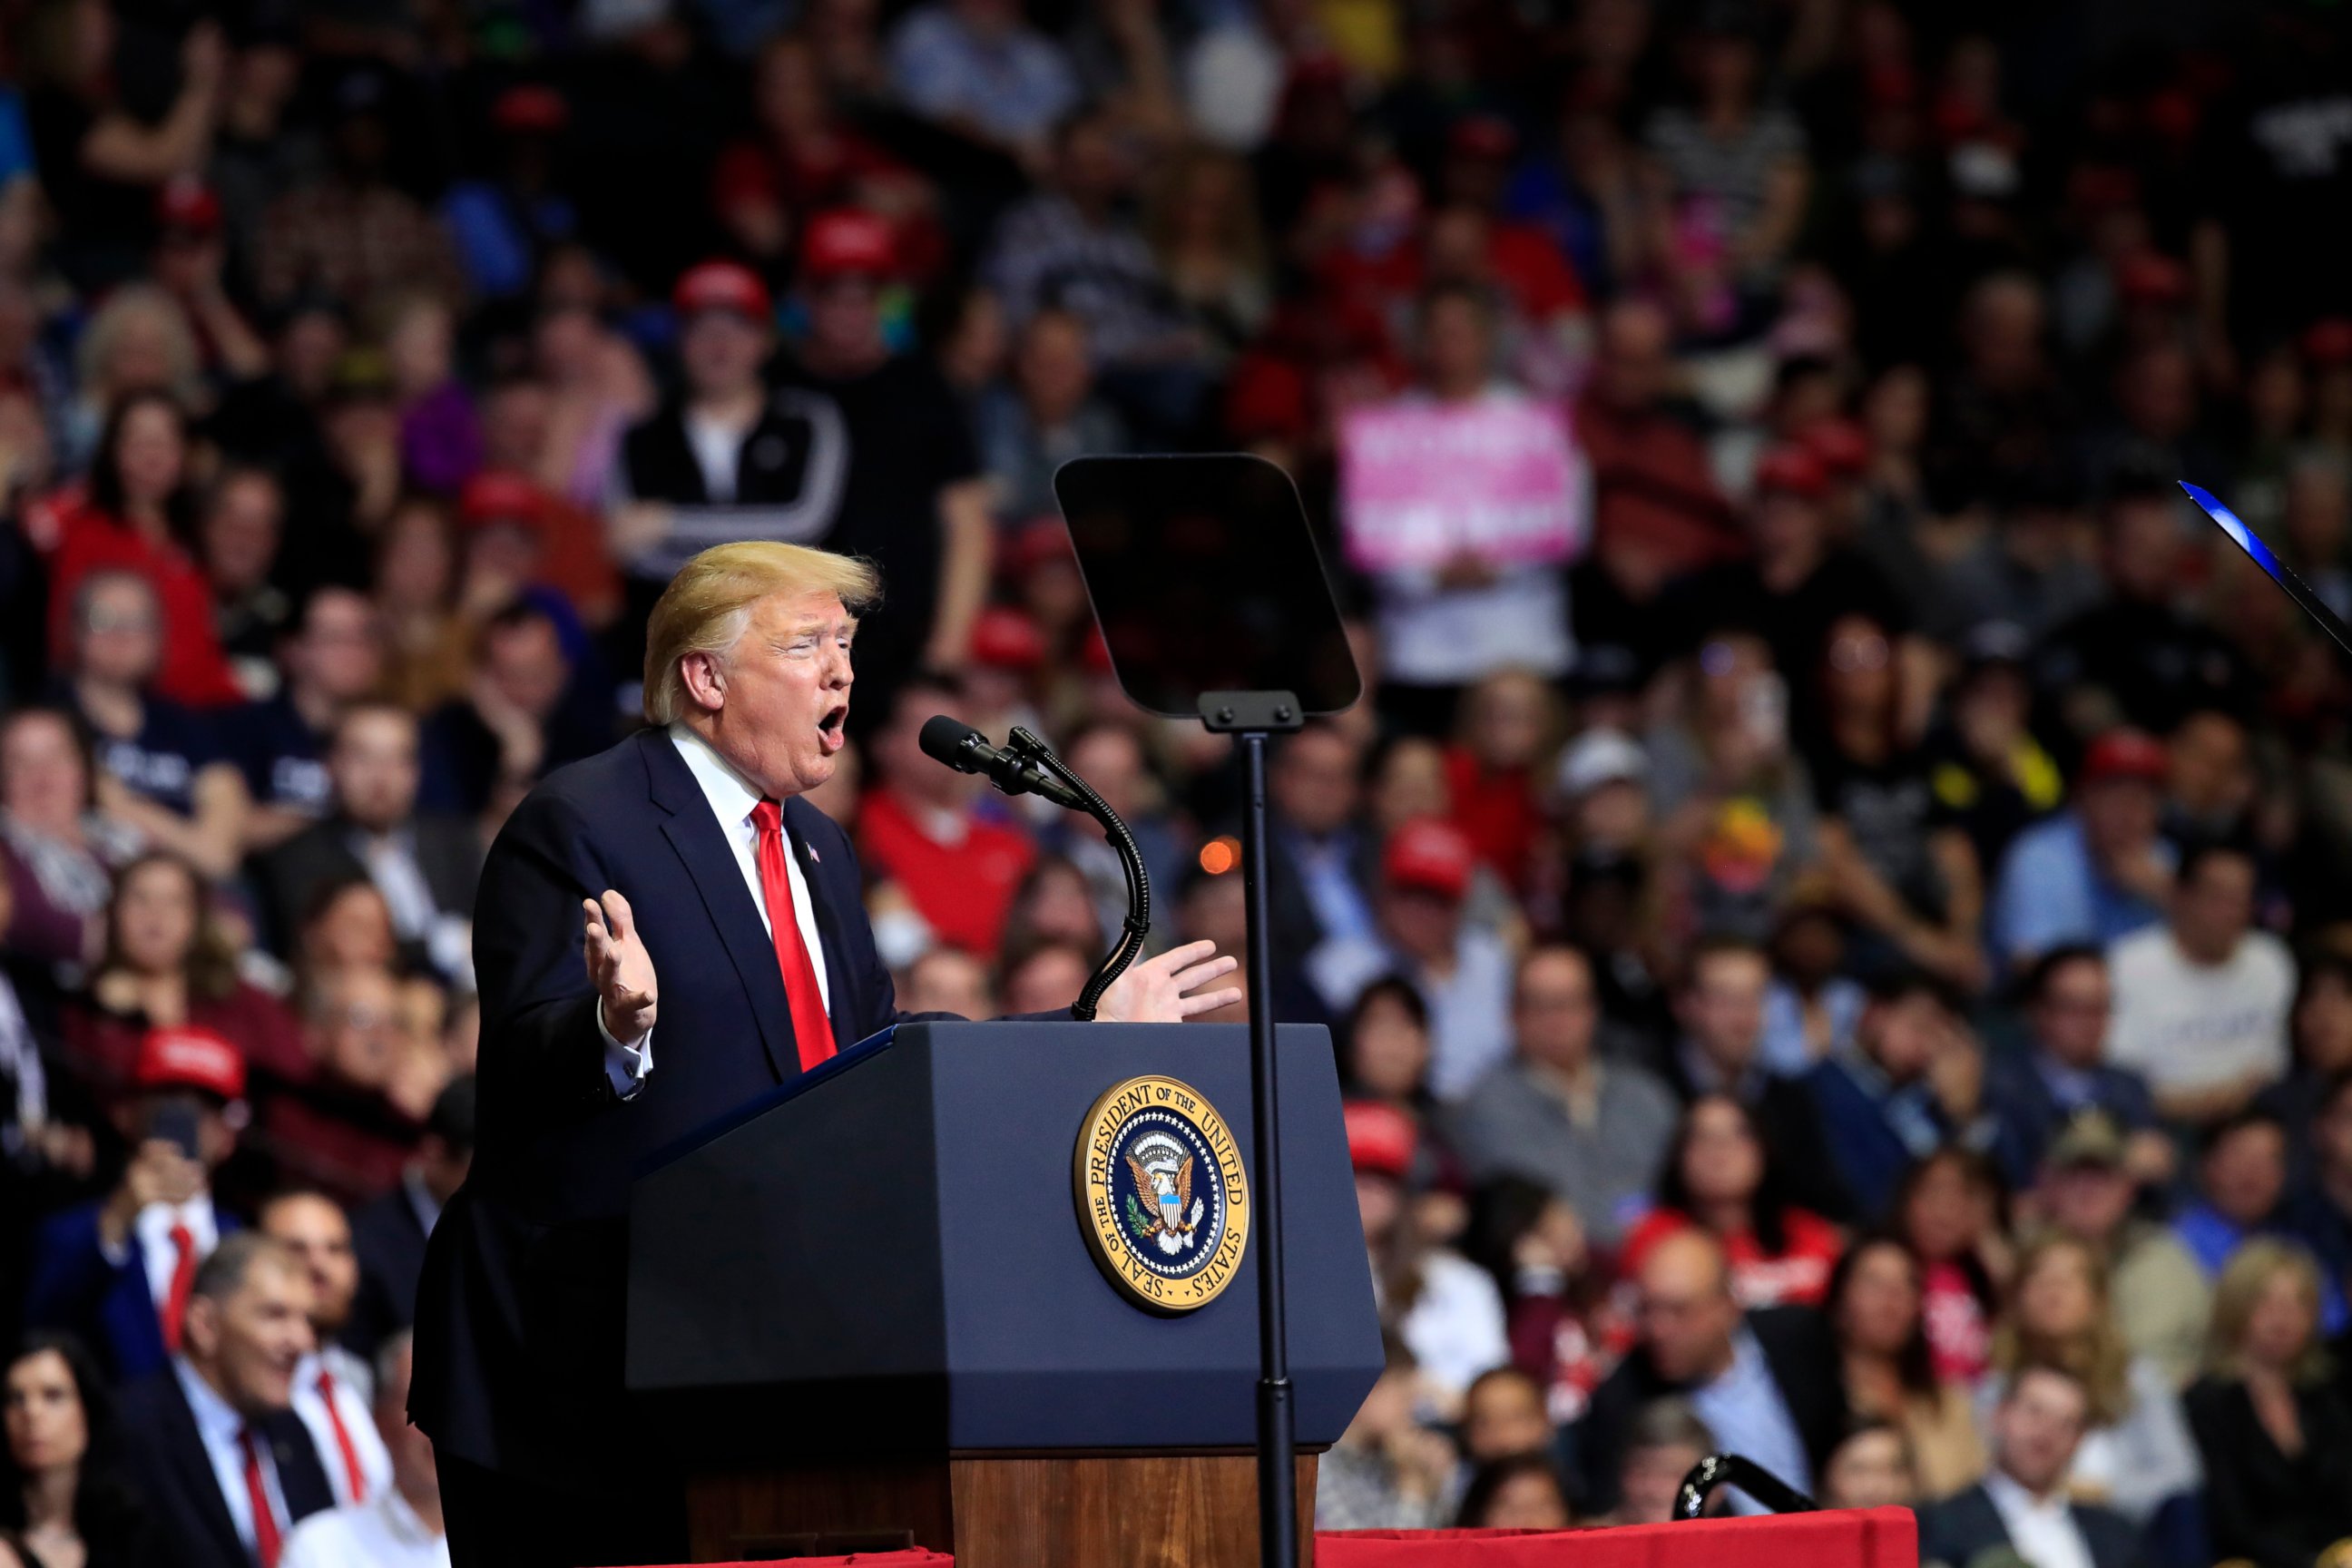 President Donald Trump speaks at a campaign rally in Grand Rapids, Mich., Thursday, March 28, 2019.